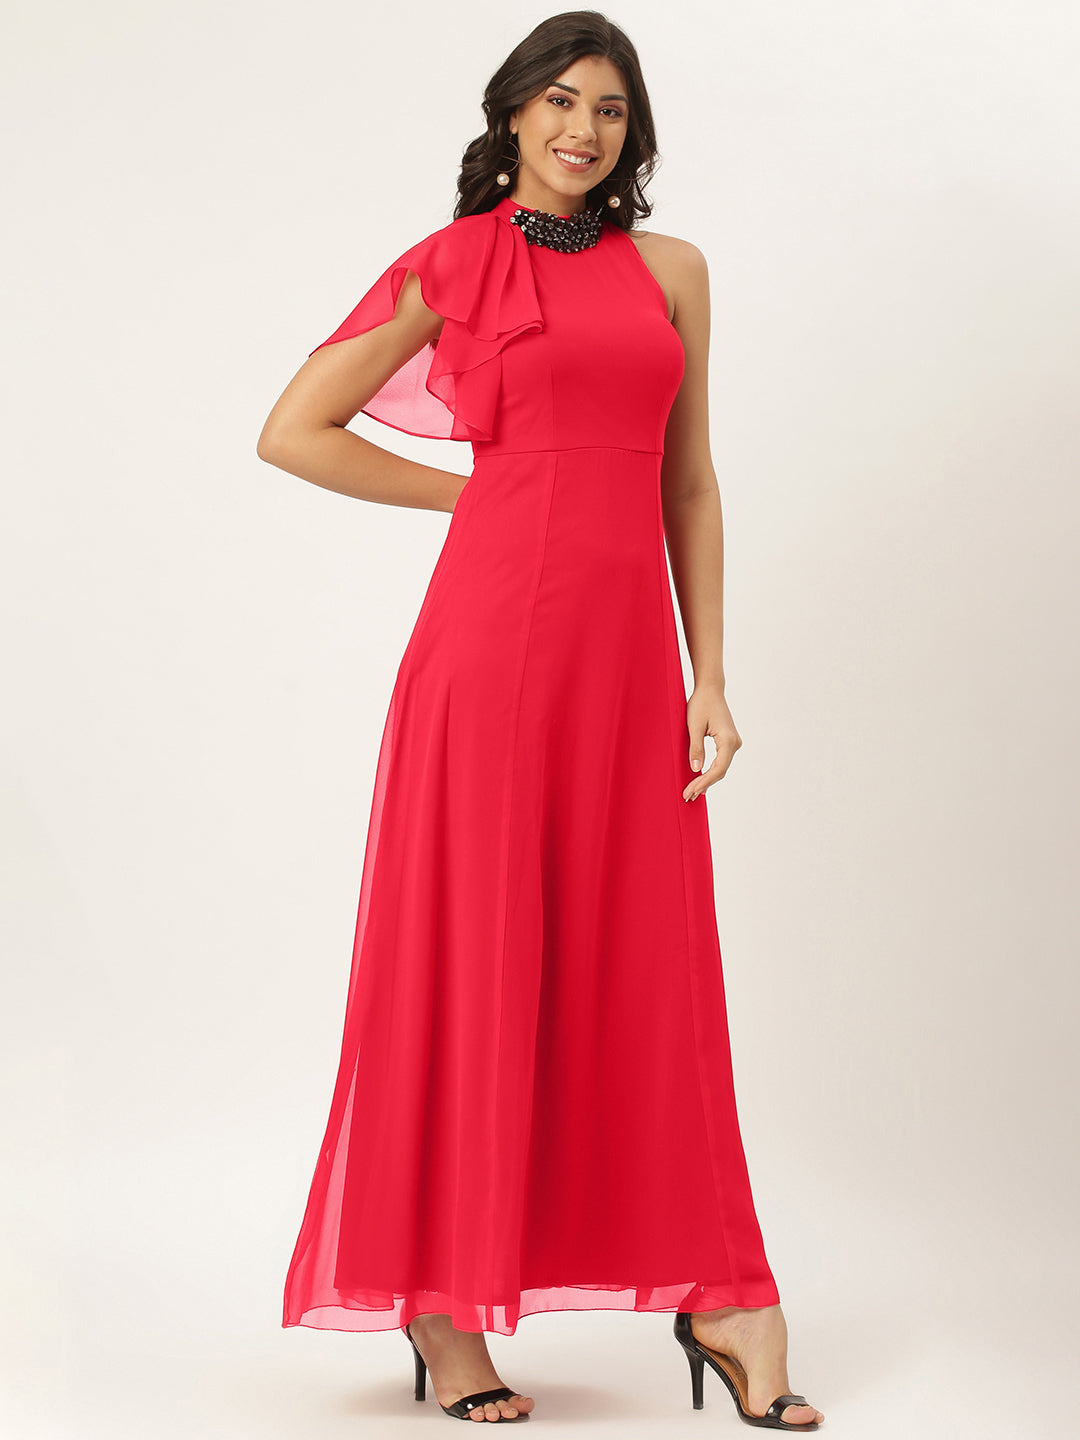 Red Solid Maxi Dress with Embellished Neck